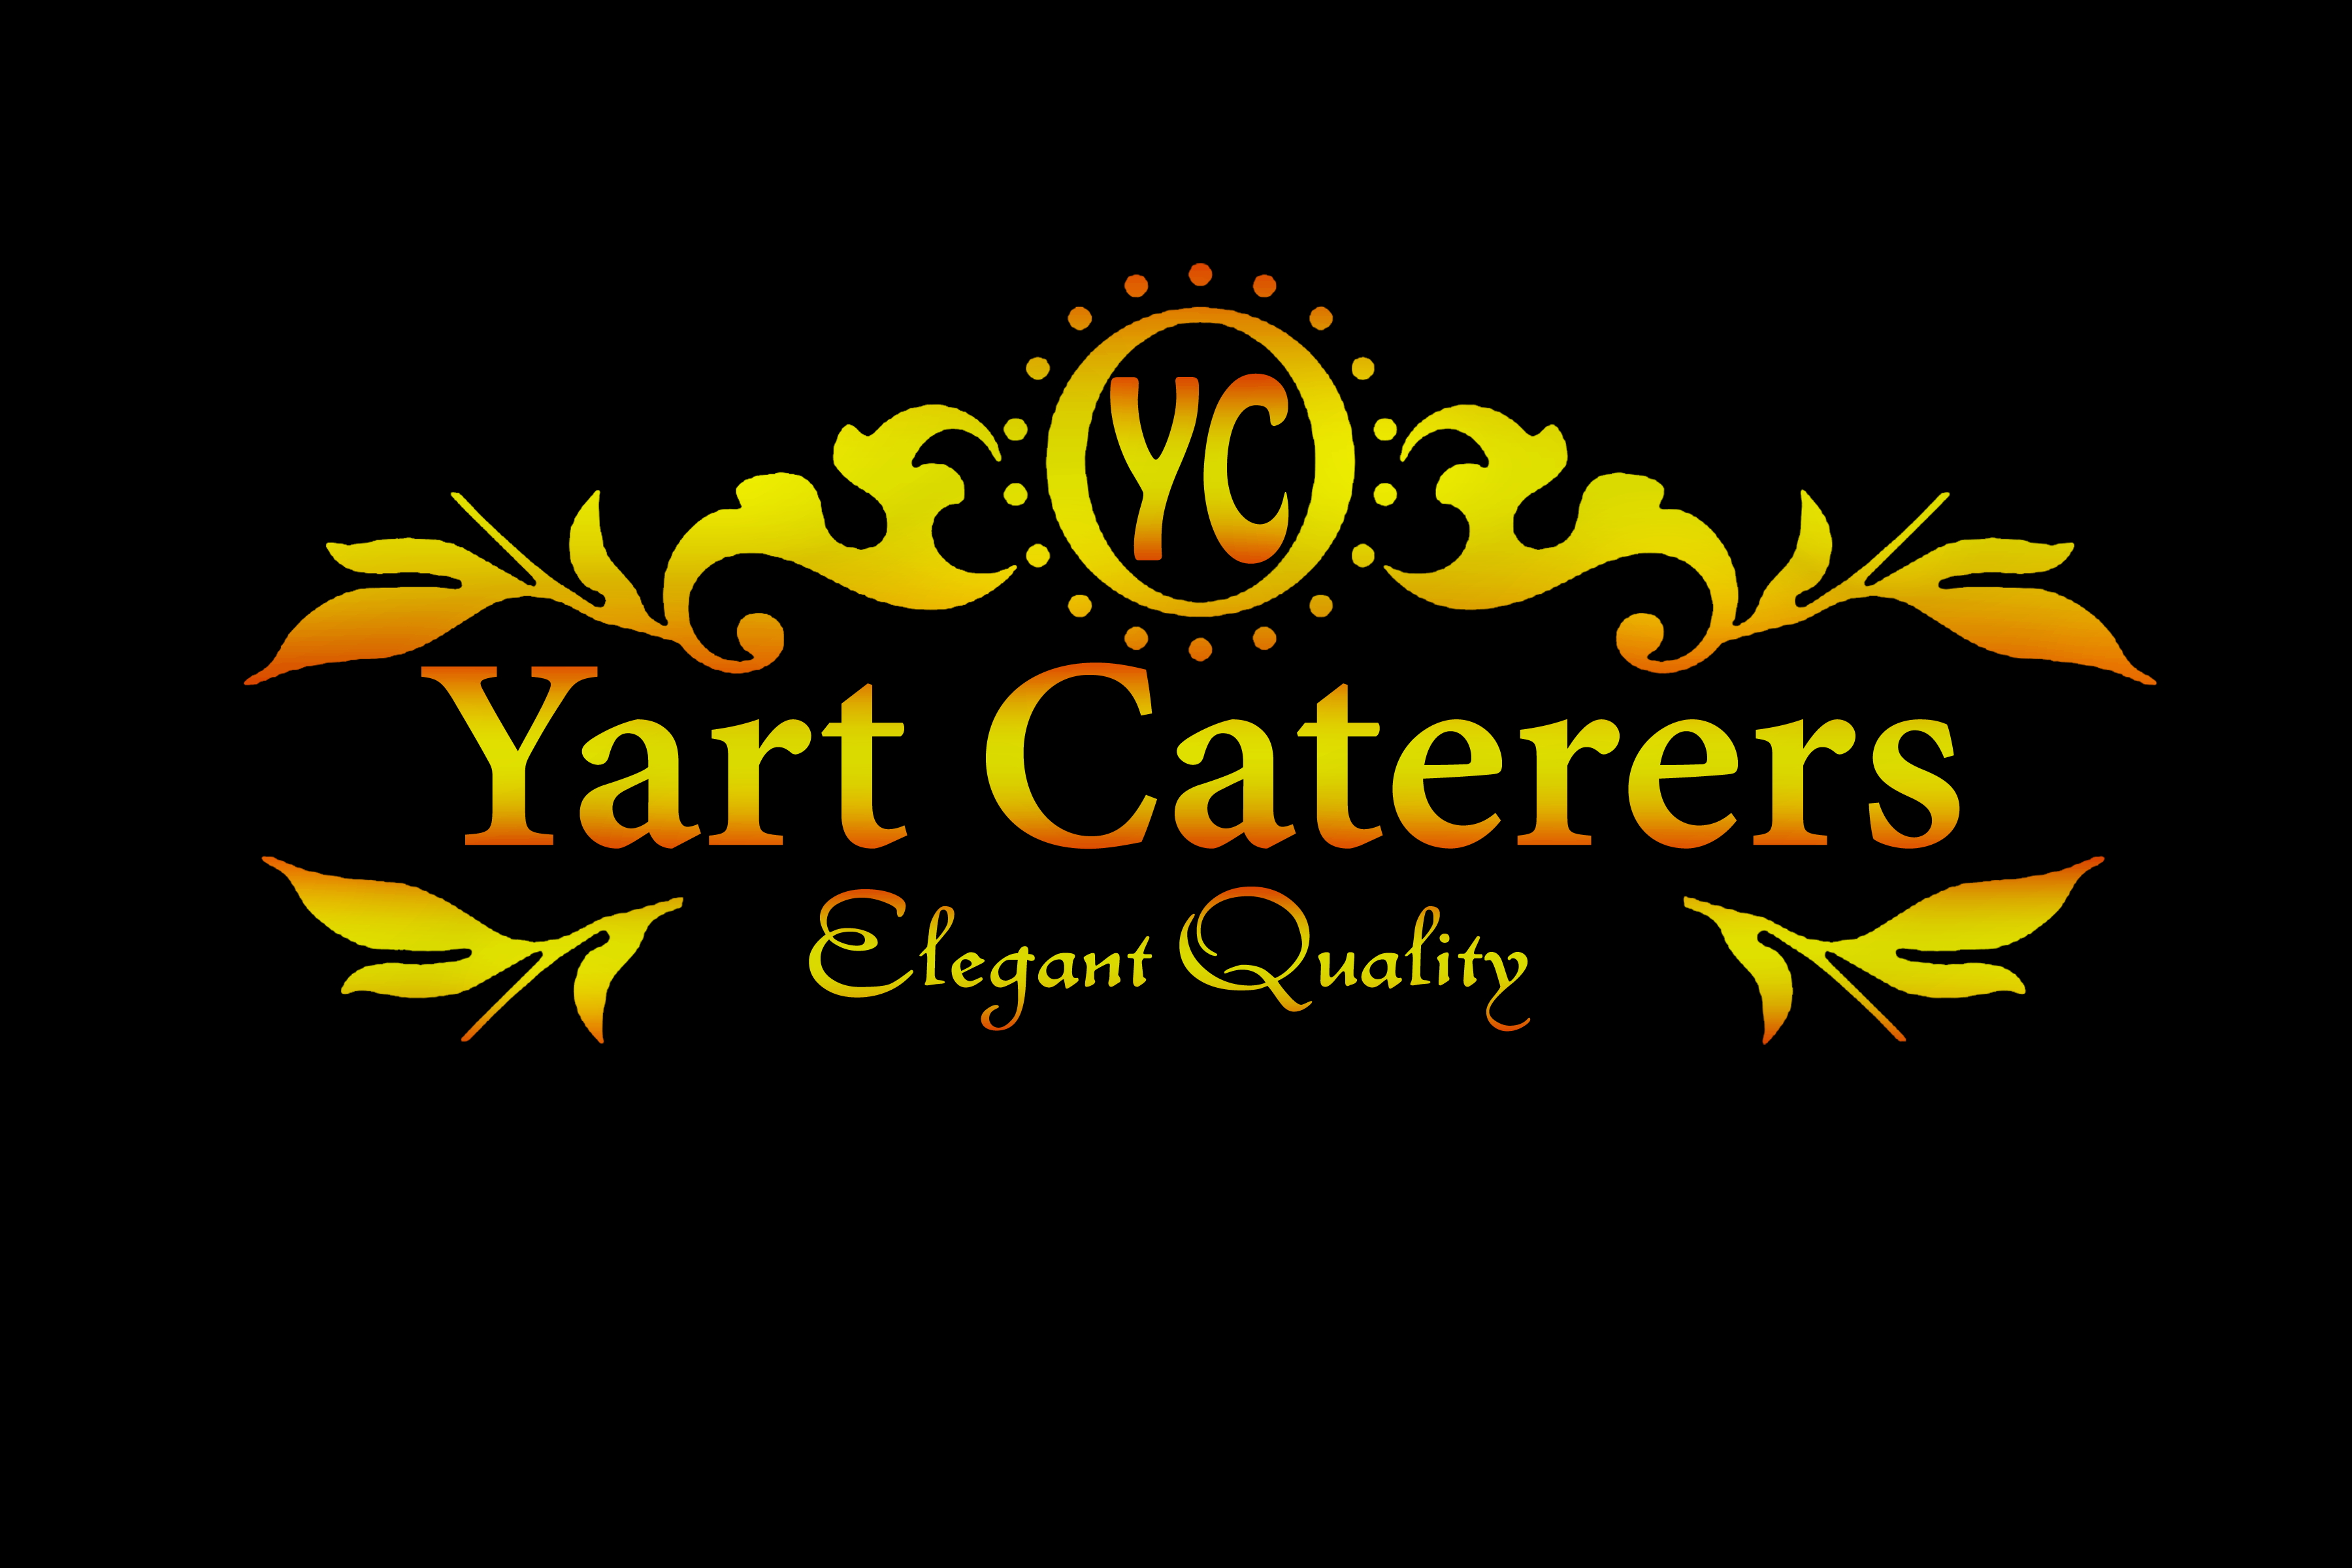 Yart Caterers - Best caterers in Chandigarh|Catering Services|Event Services